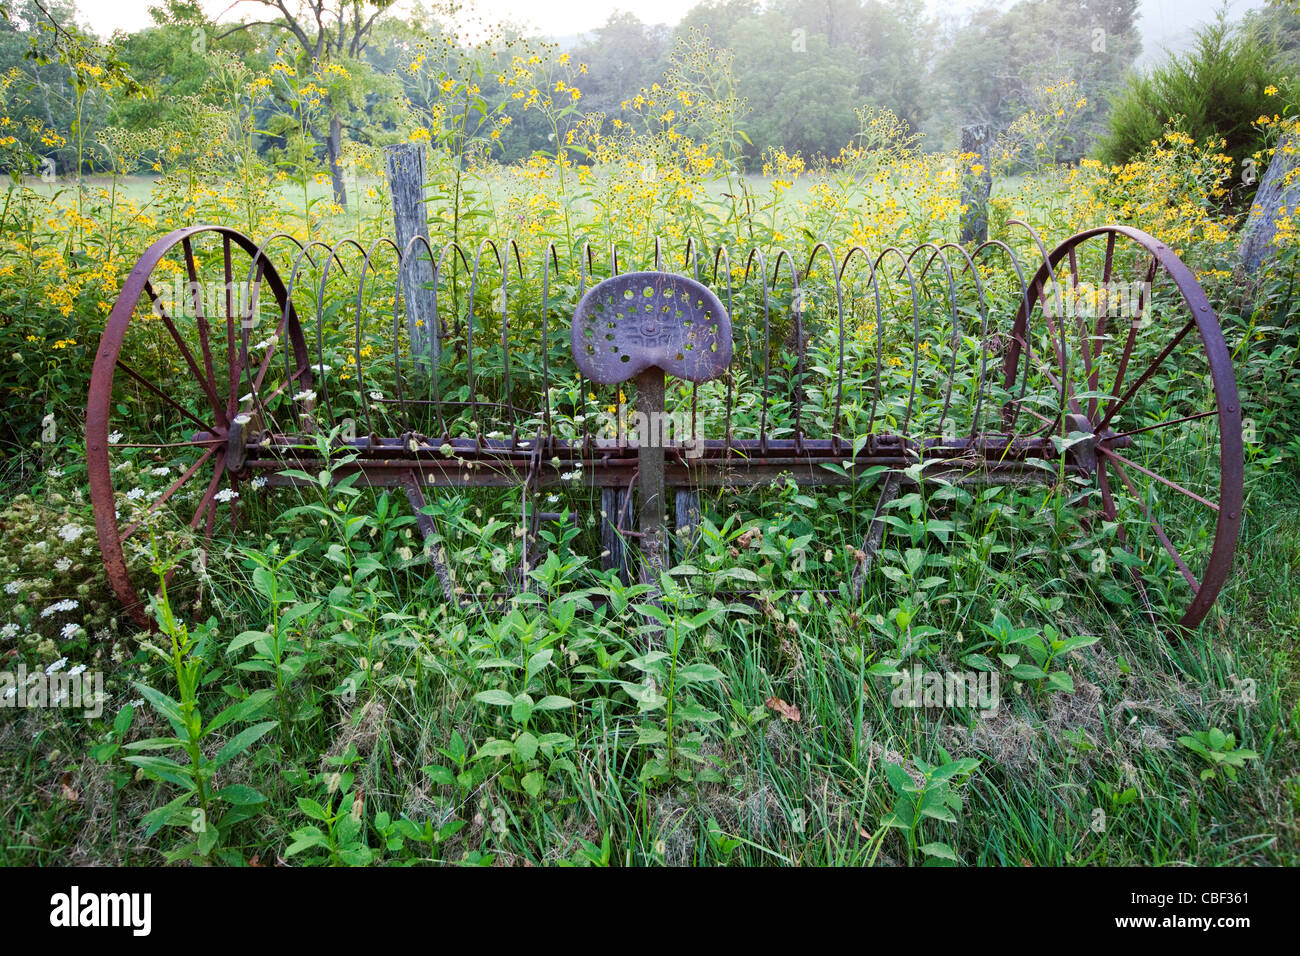 An antique farm implement, a rake, overgrown with weeds. Stock Photo